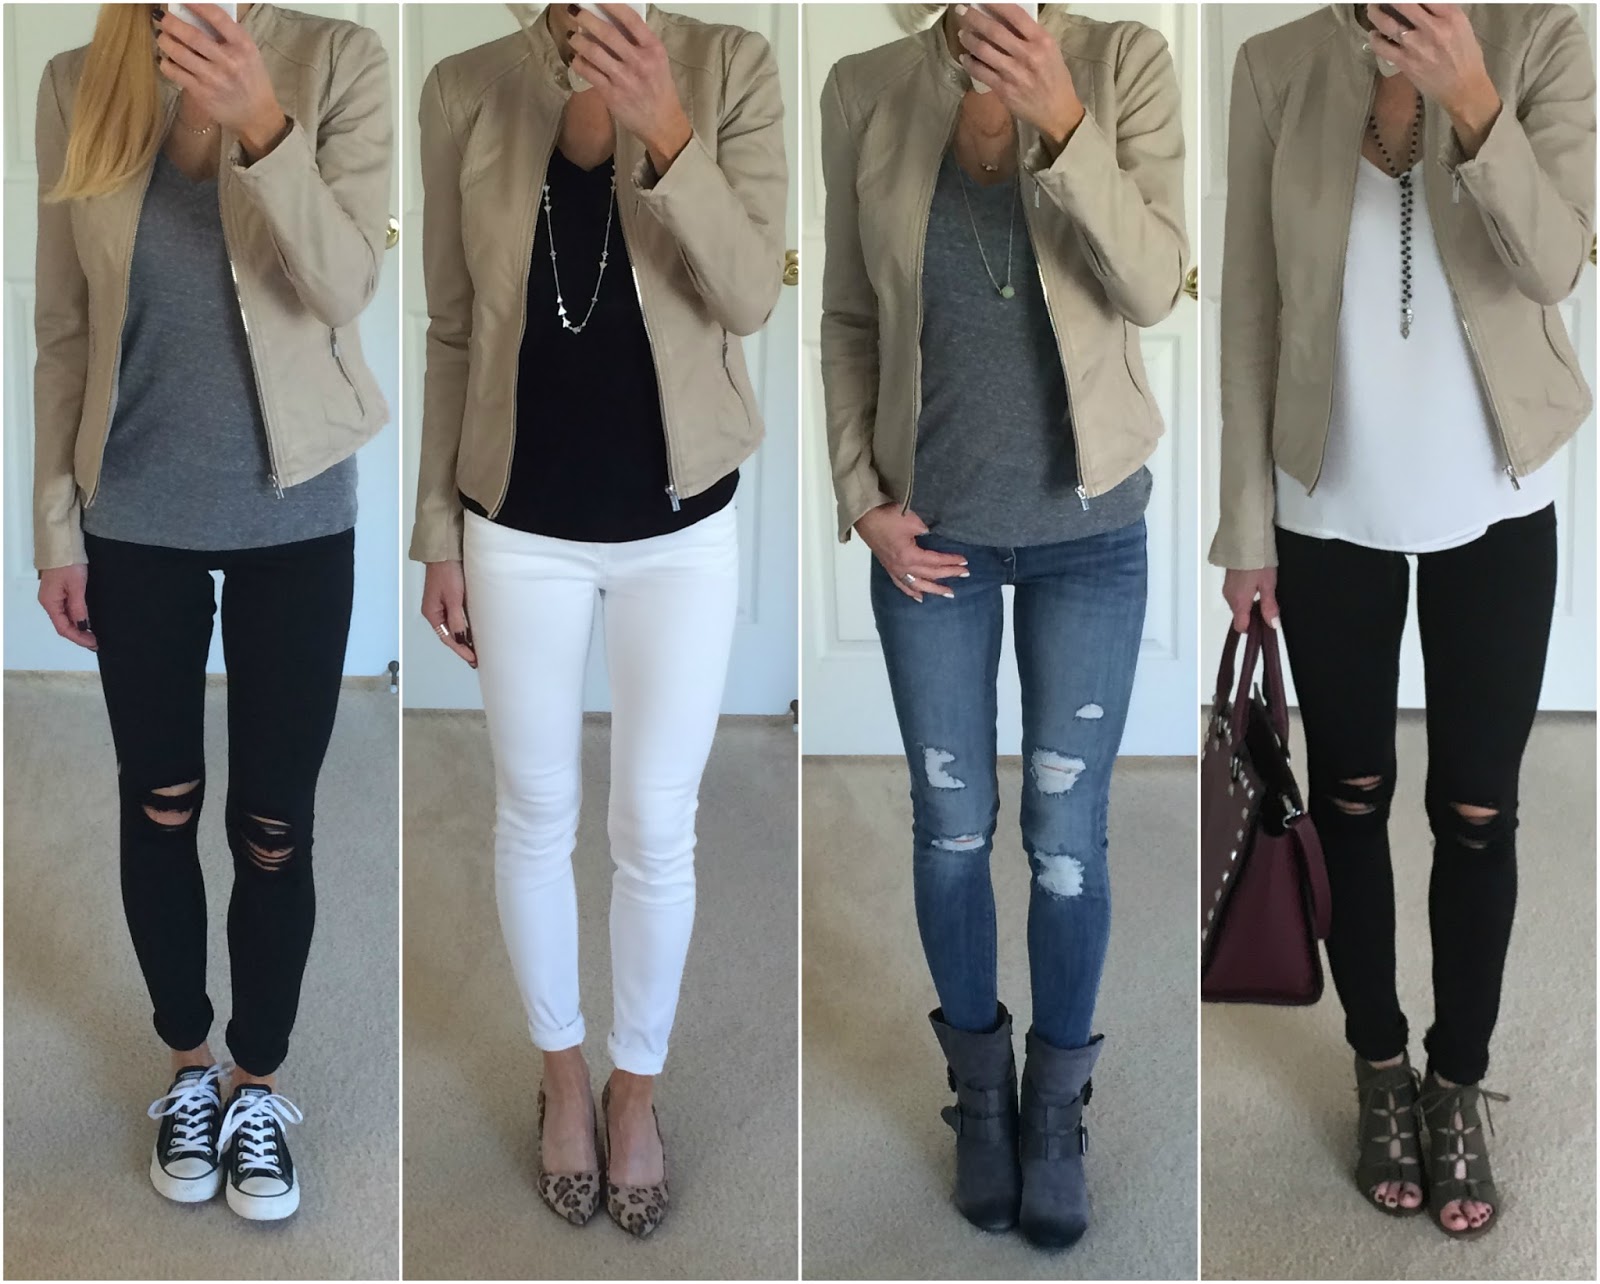 Black and Beige Moto Jacket Outfit Roundup | On the Daily EXPRESS